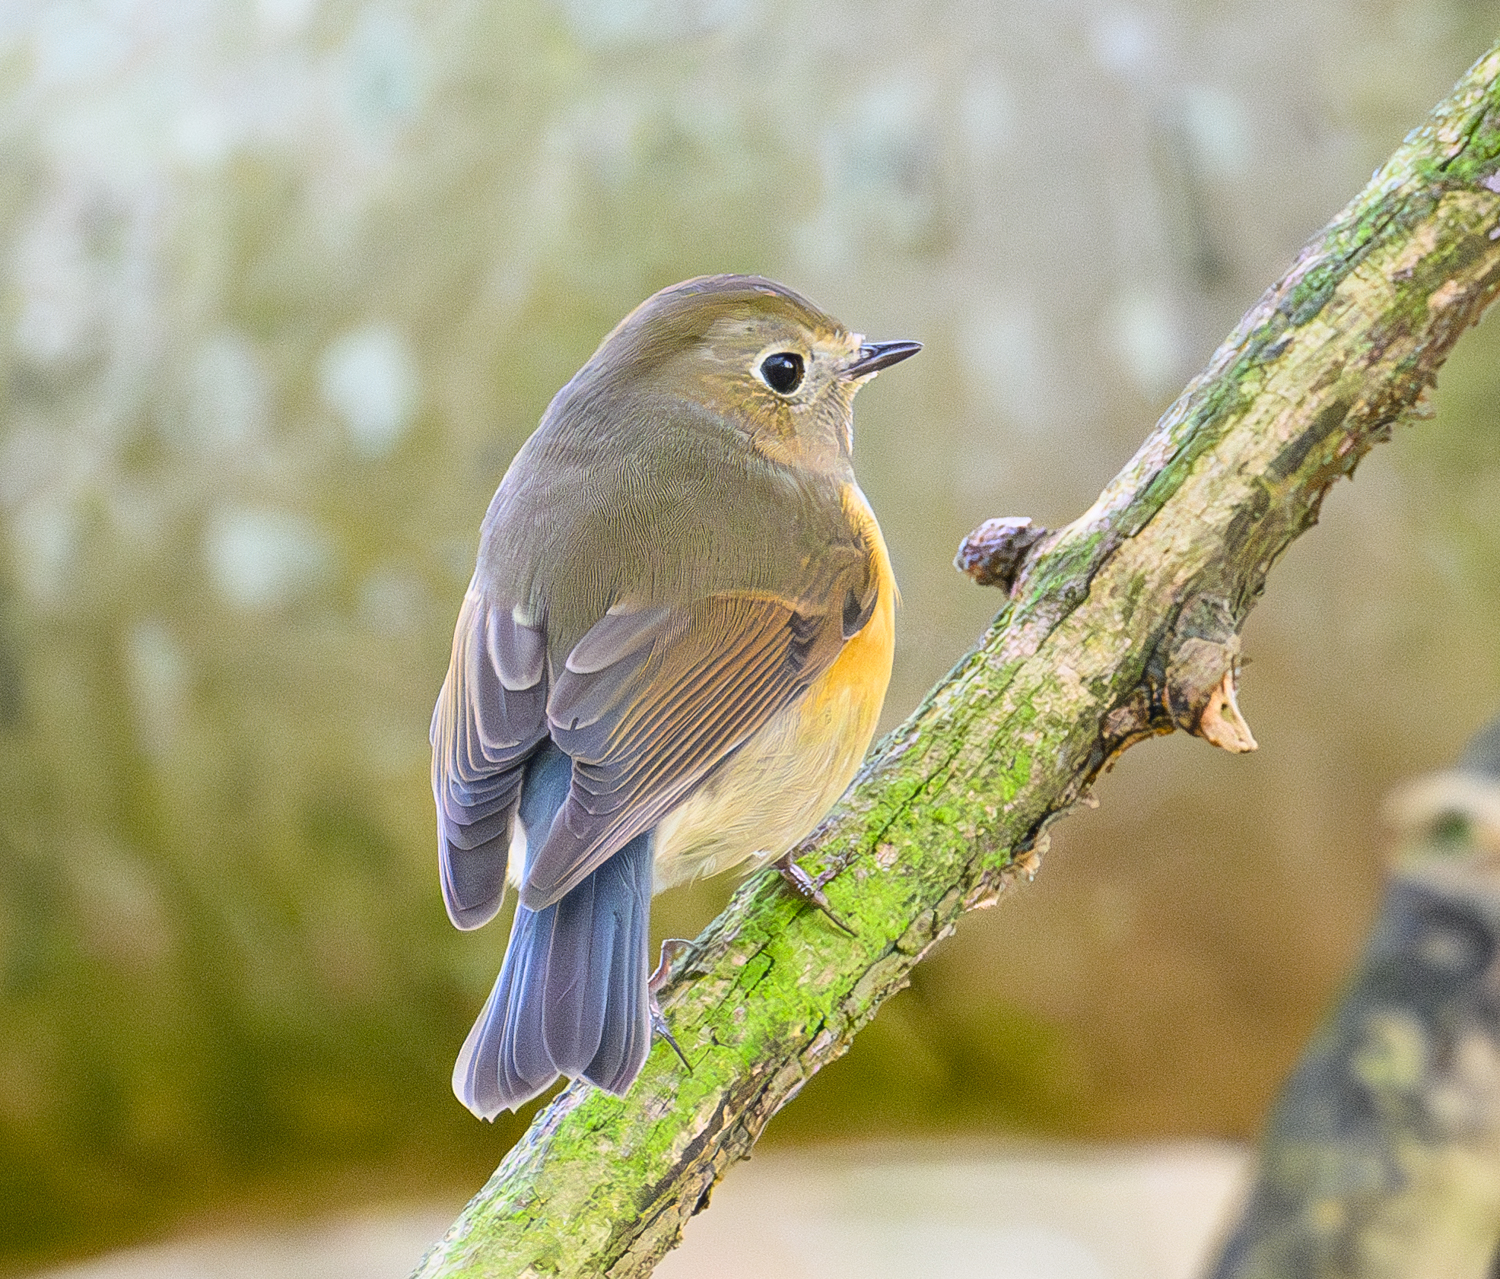 Red-flanked Bluetail (Tarsiger cyanurus) - North American Birds